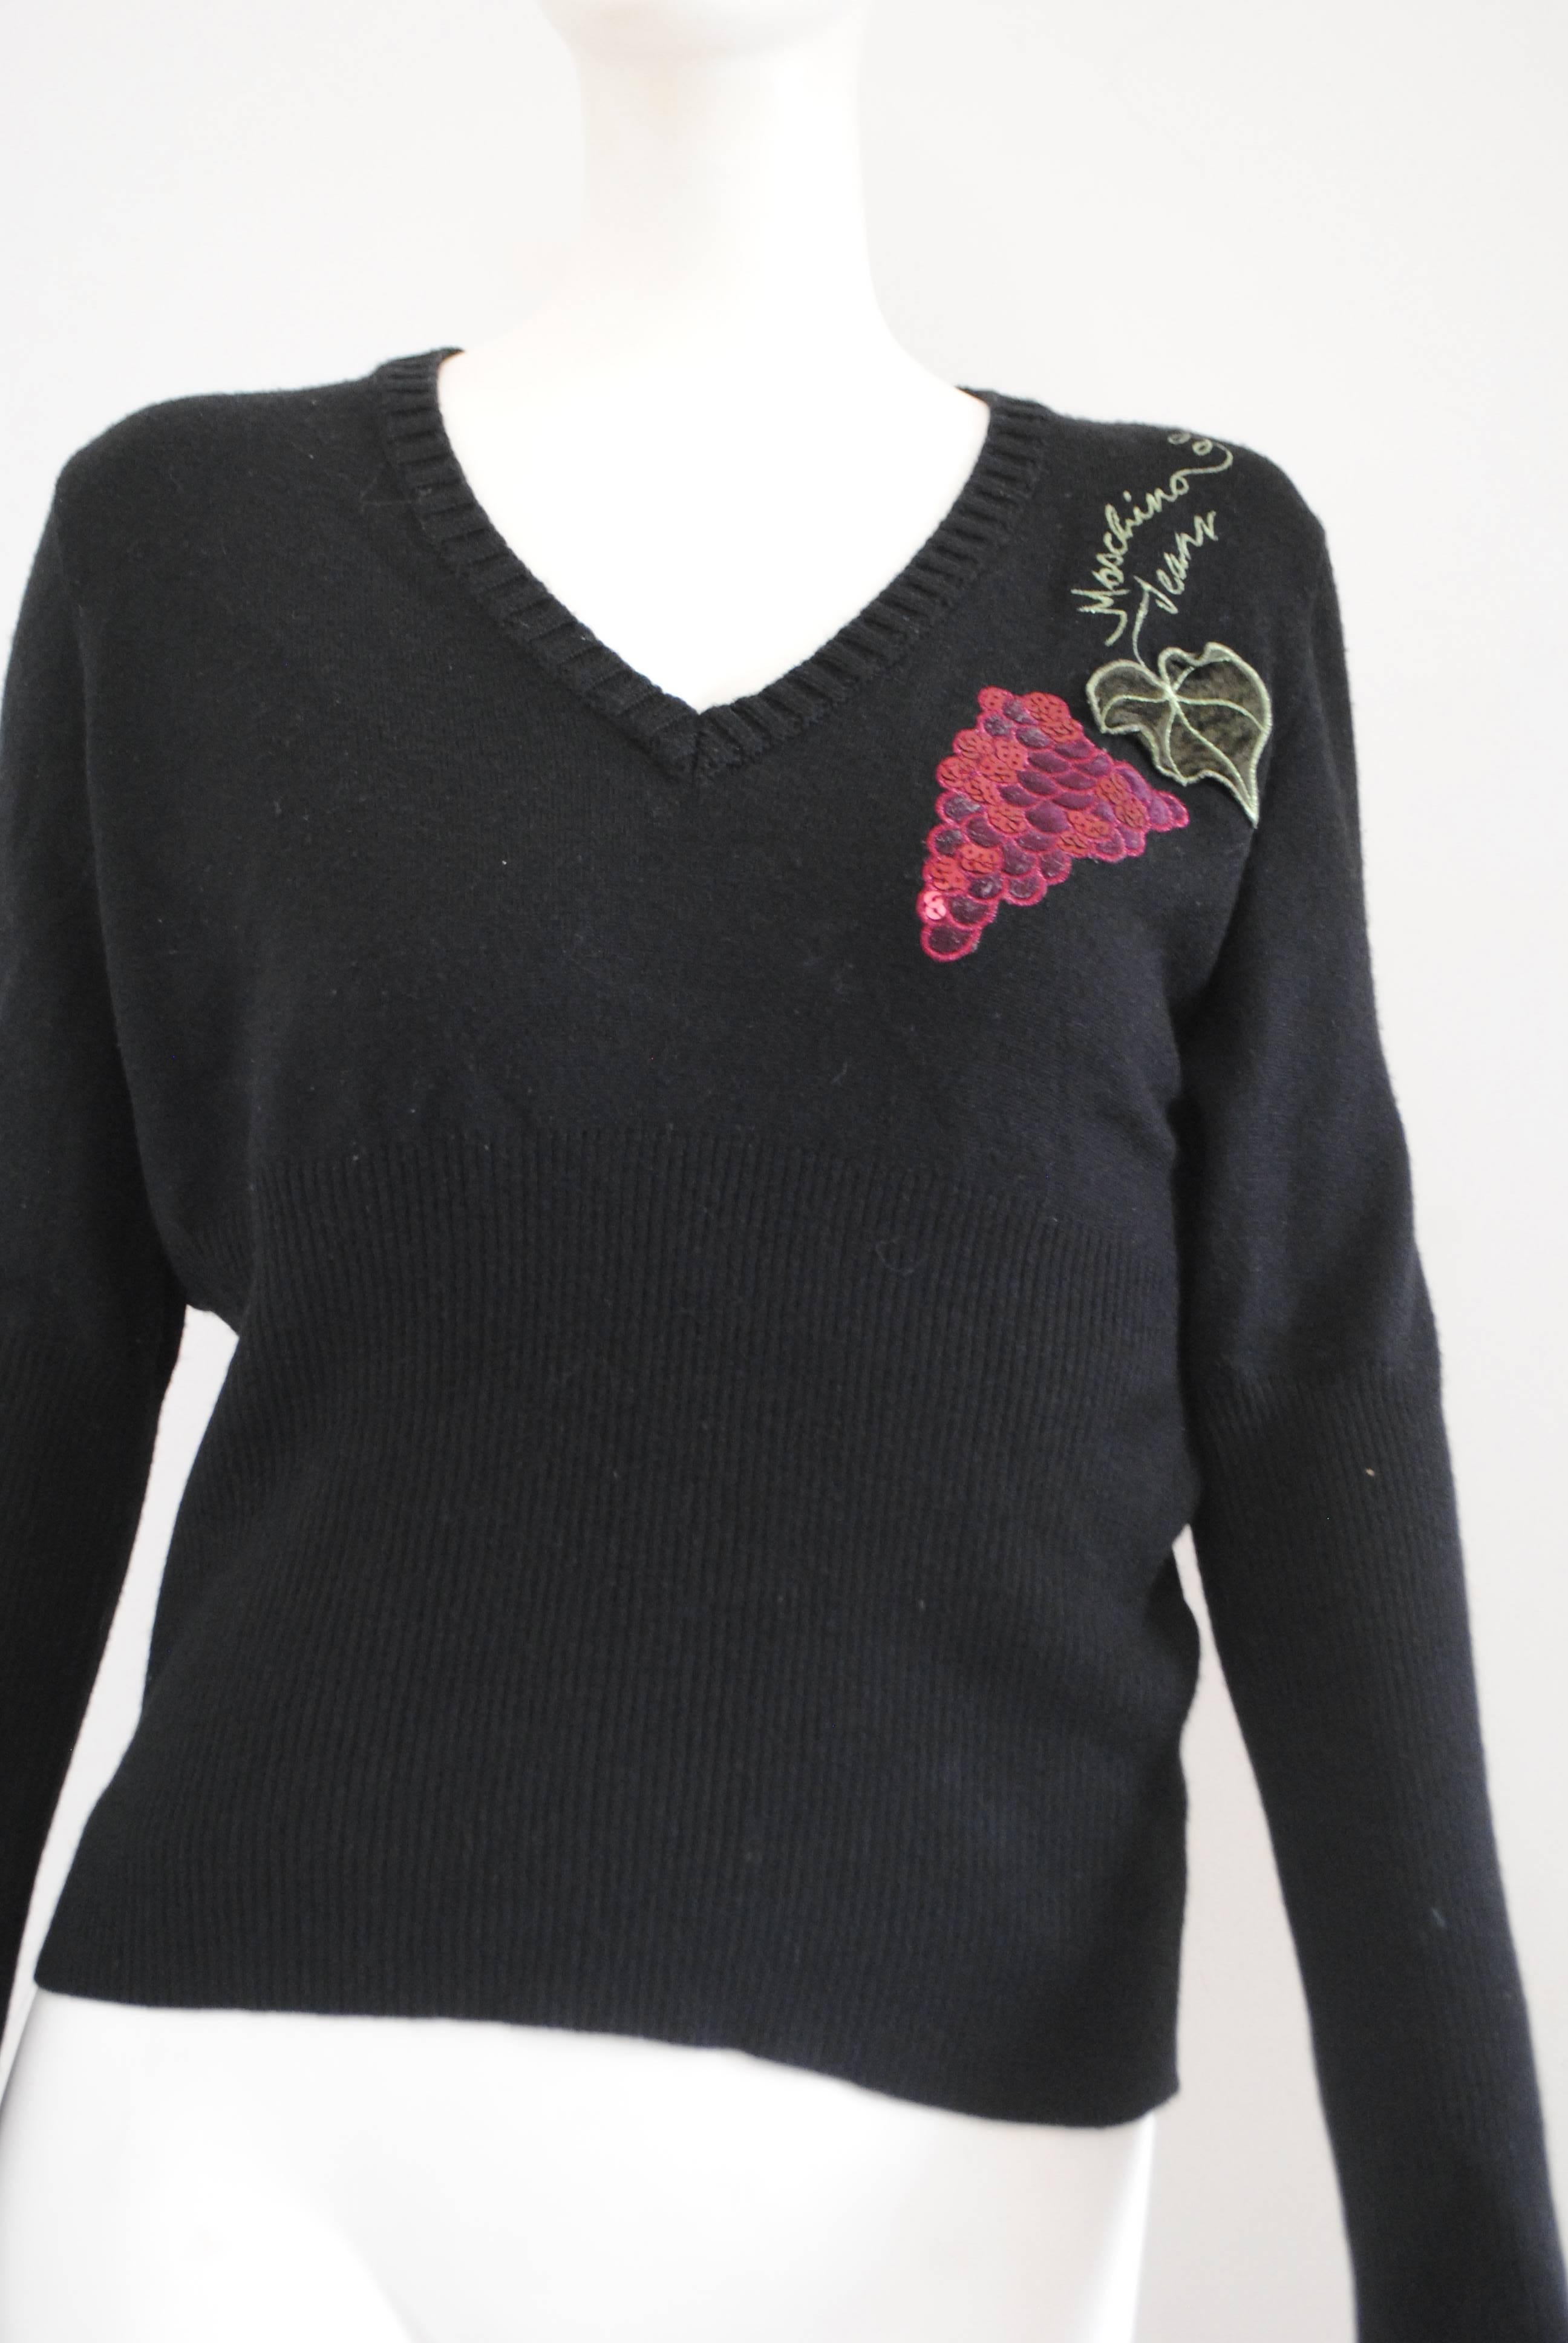 Moschino Jeans Black Grapes Sweater

Totally made in italy in italian size range 46

composition: Wool and Acrylic